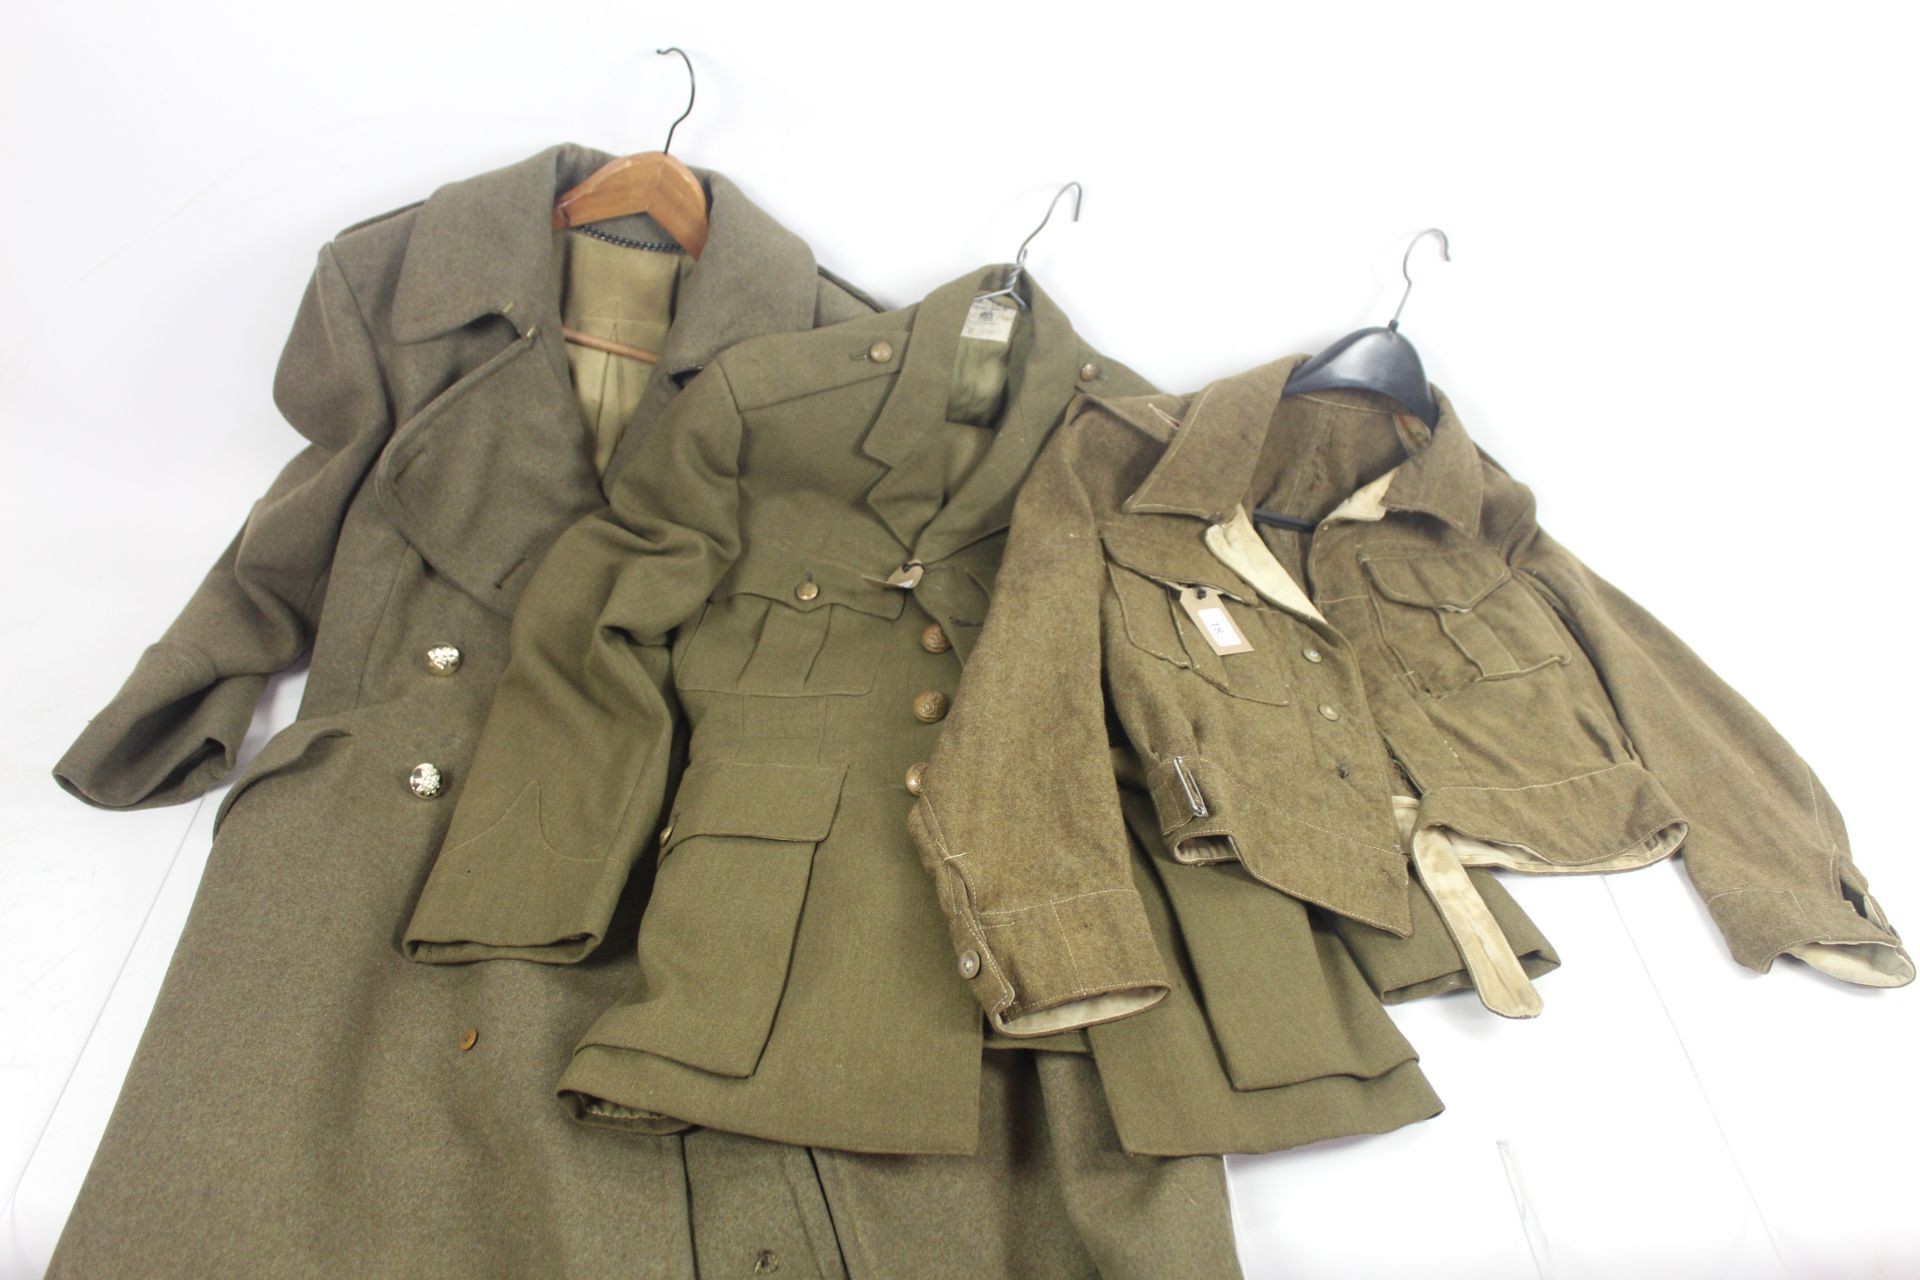 A WWII 1940 Patt battle dress blouse with R.A. Off